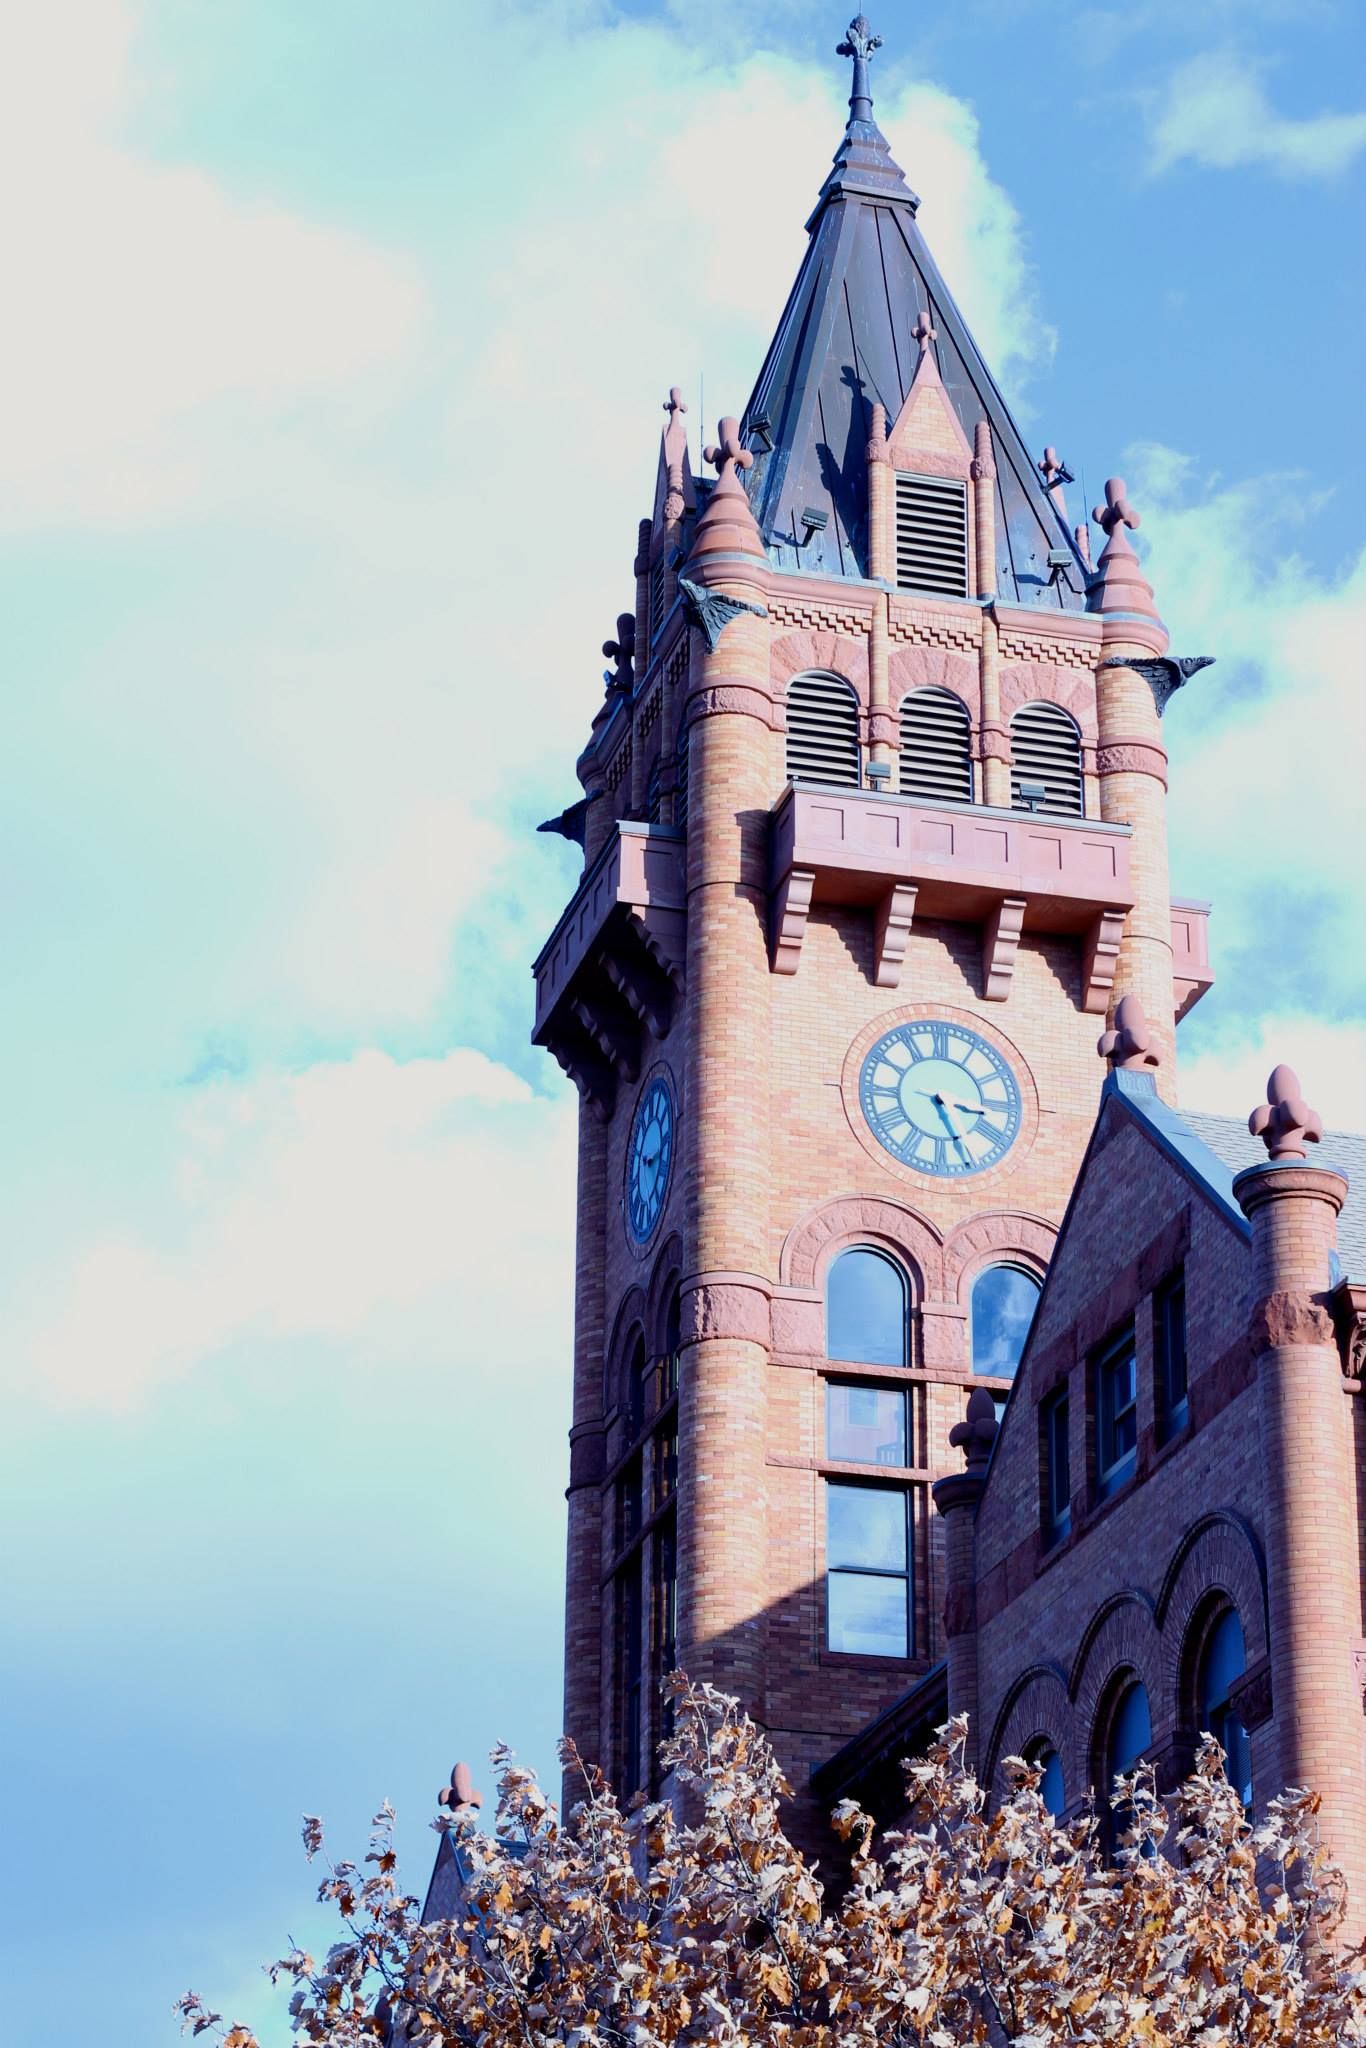 brown brick courthouse steeple with a clock